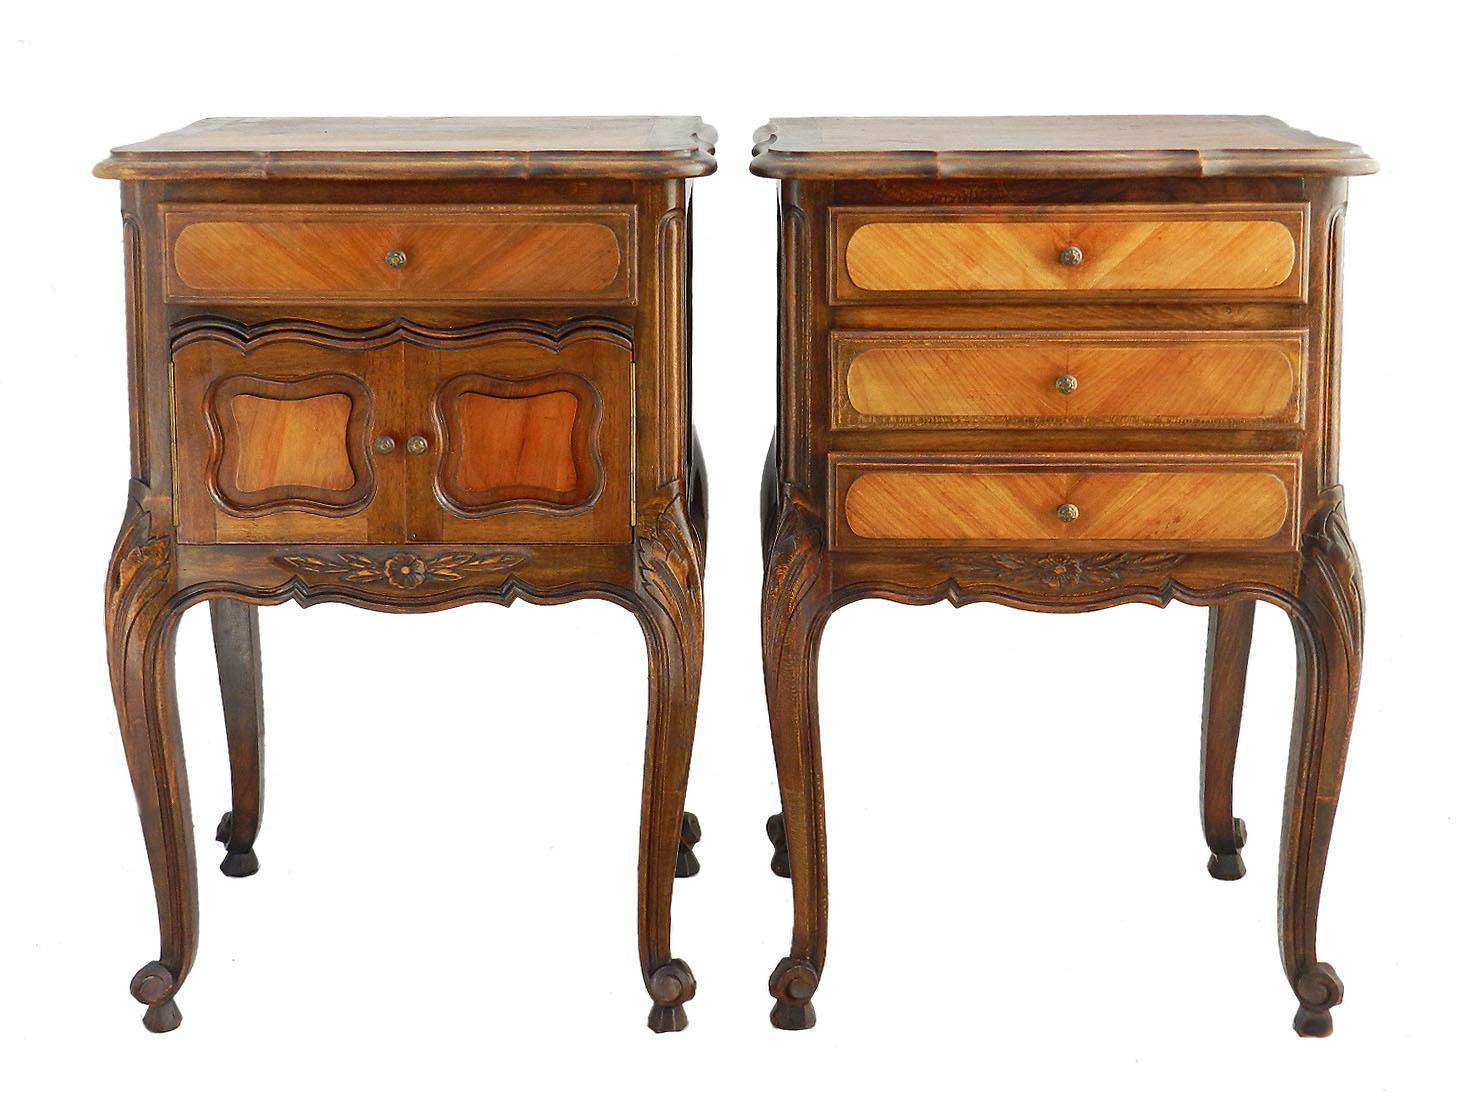 Pair of side cabinets French Nightstands vintage Louis revival early 20th century
One with 3 drawers, the other has a single drawer with an unusual lower cupboard and pair of doors
Solid carved wood
Good condition with only minor signs of use for